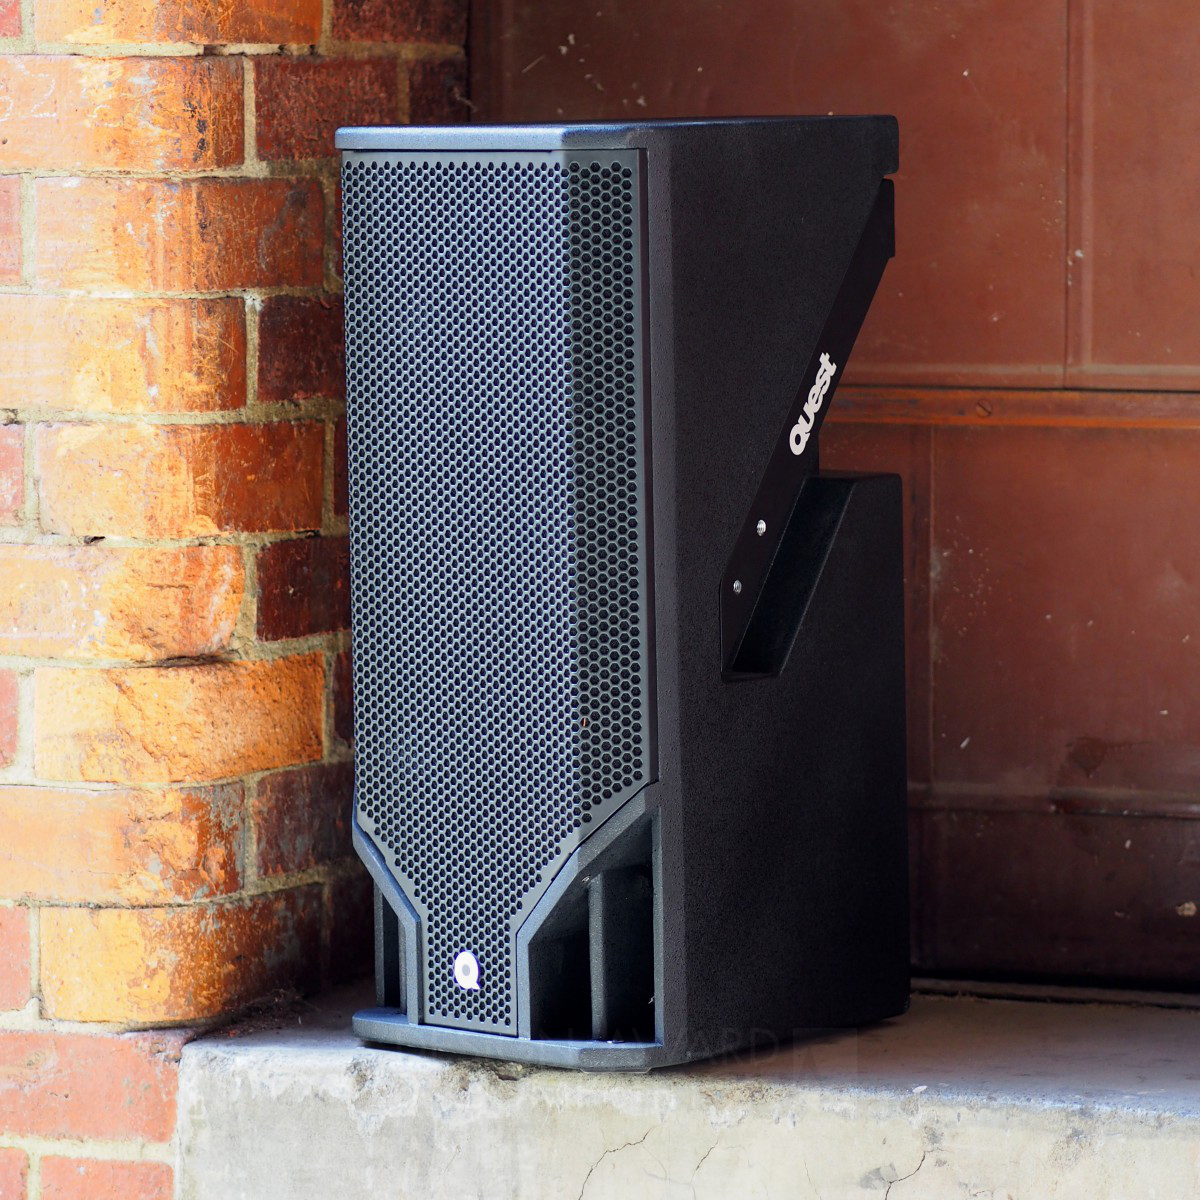 Hpi110 High-definition Loudspeaker by Michael Chijoff